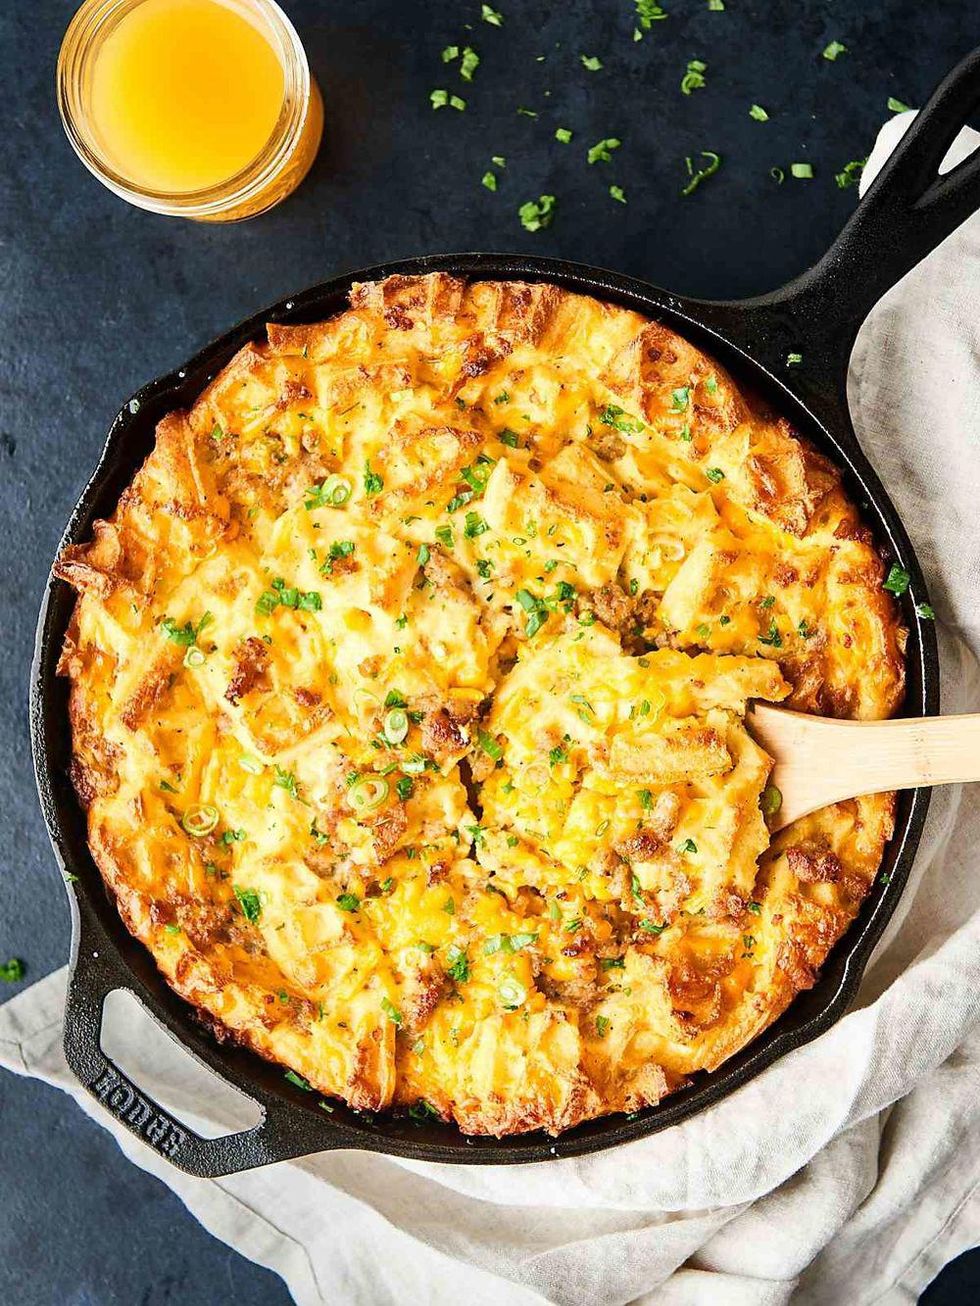 25+ Make-Ahead Recipes For Mother’s Day Brunch - Brit + Co